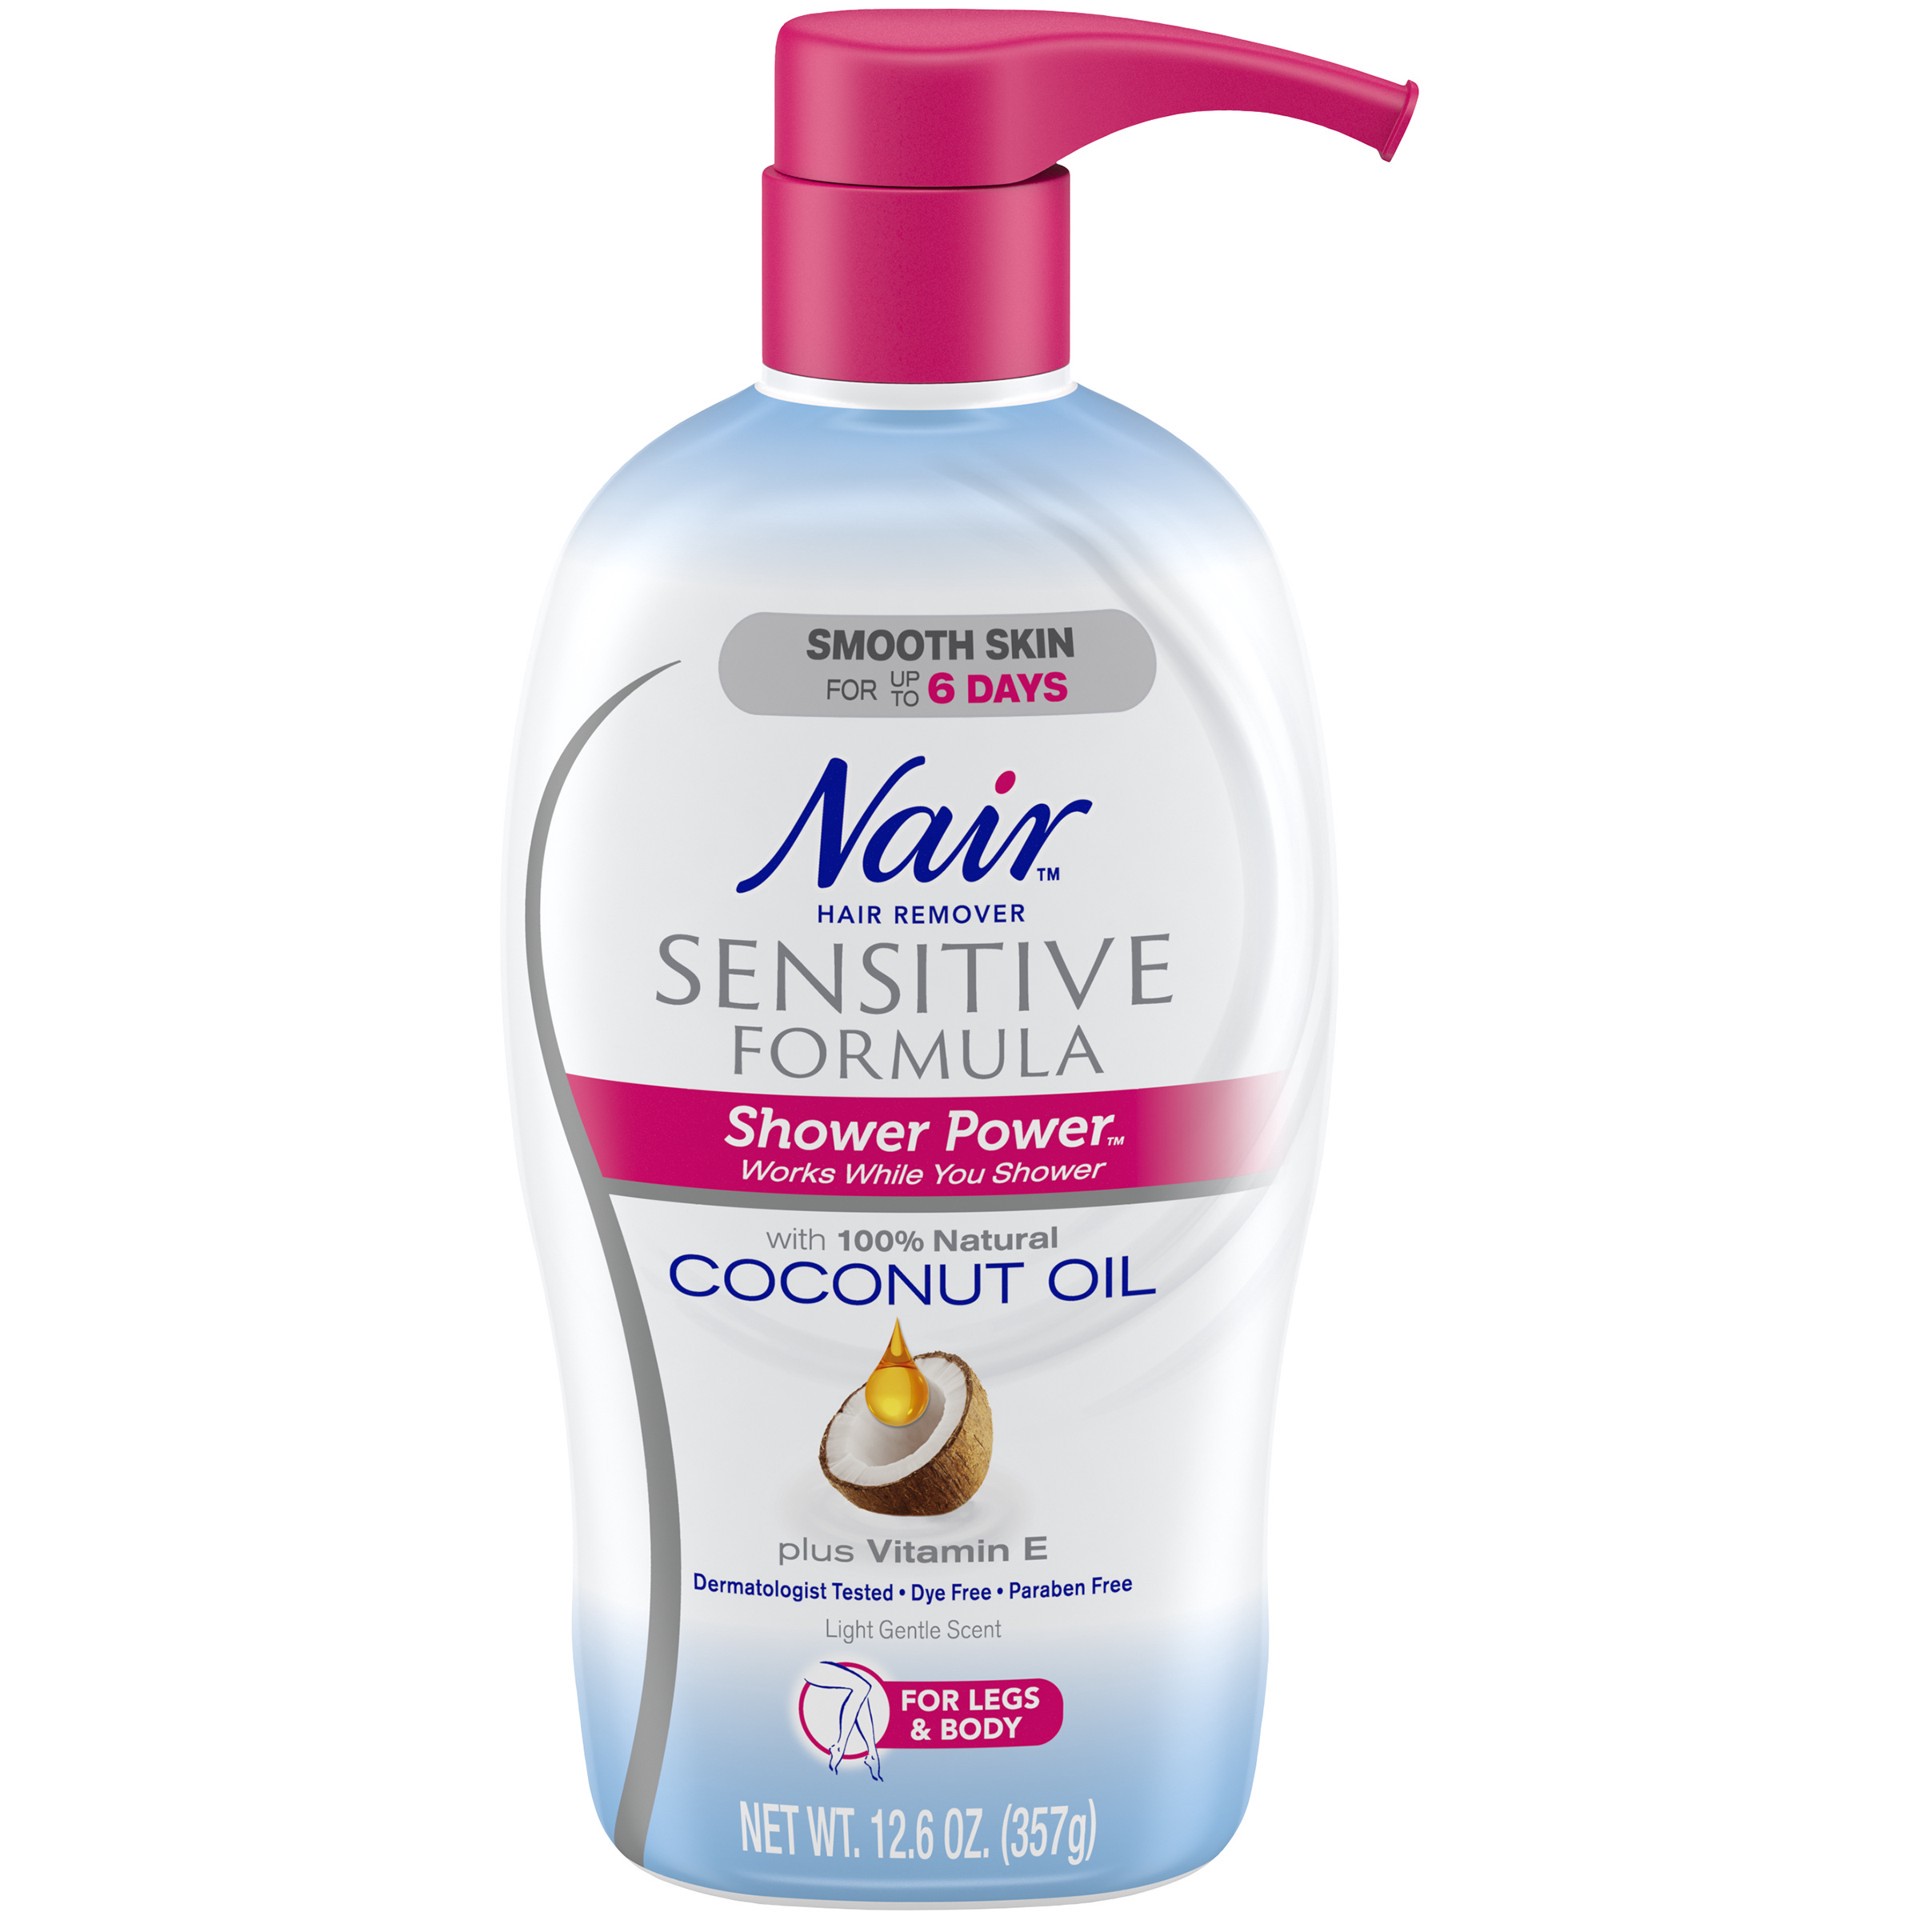 slide 1 of 4, Nair Hair Remover Sensitive Formula Shower Power with Coconut Oil and Vitamin E, 12.6oz, 12.6 oz